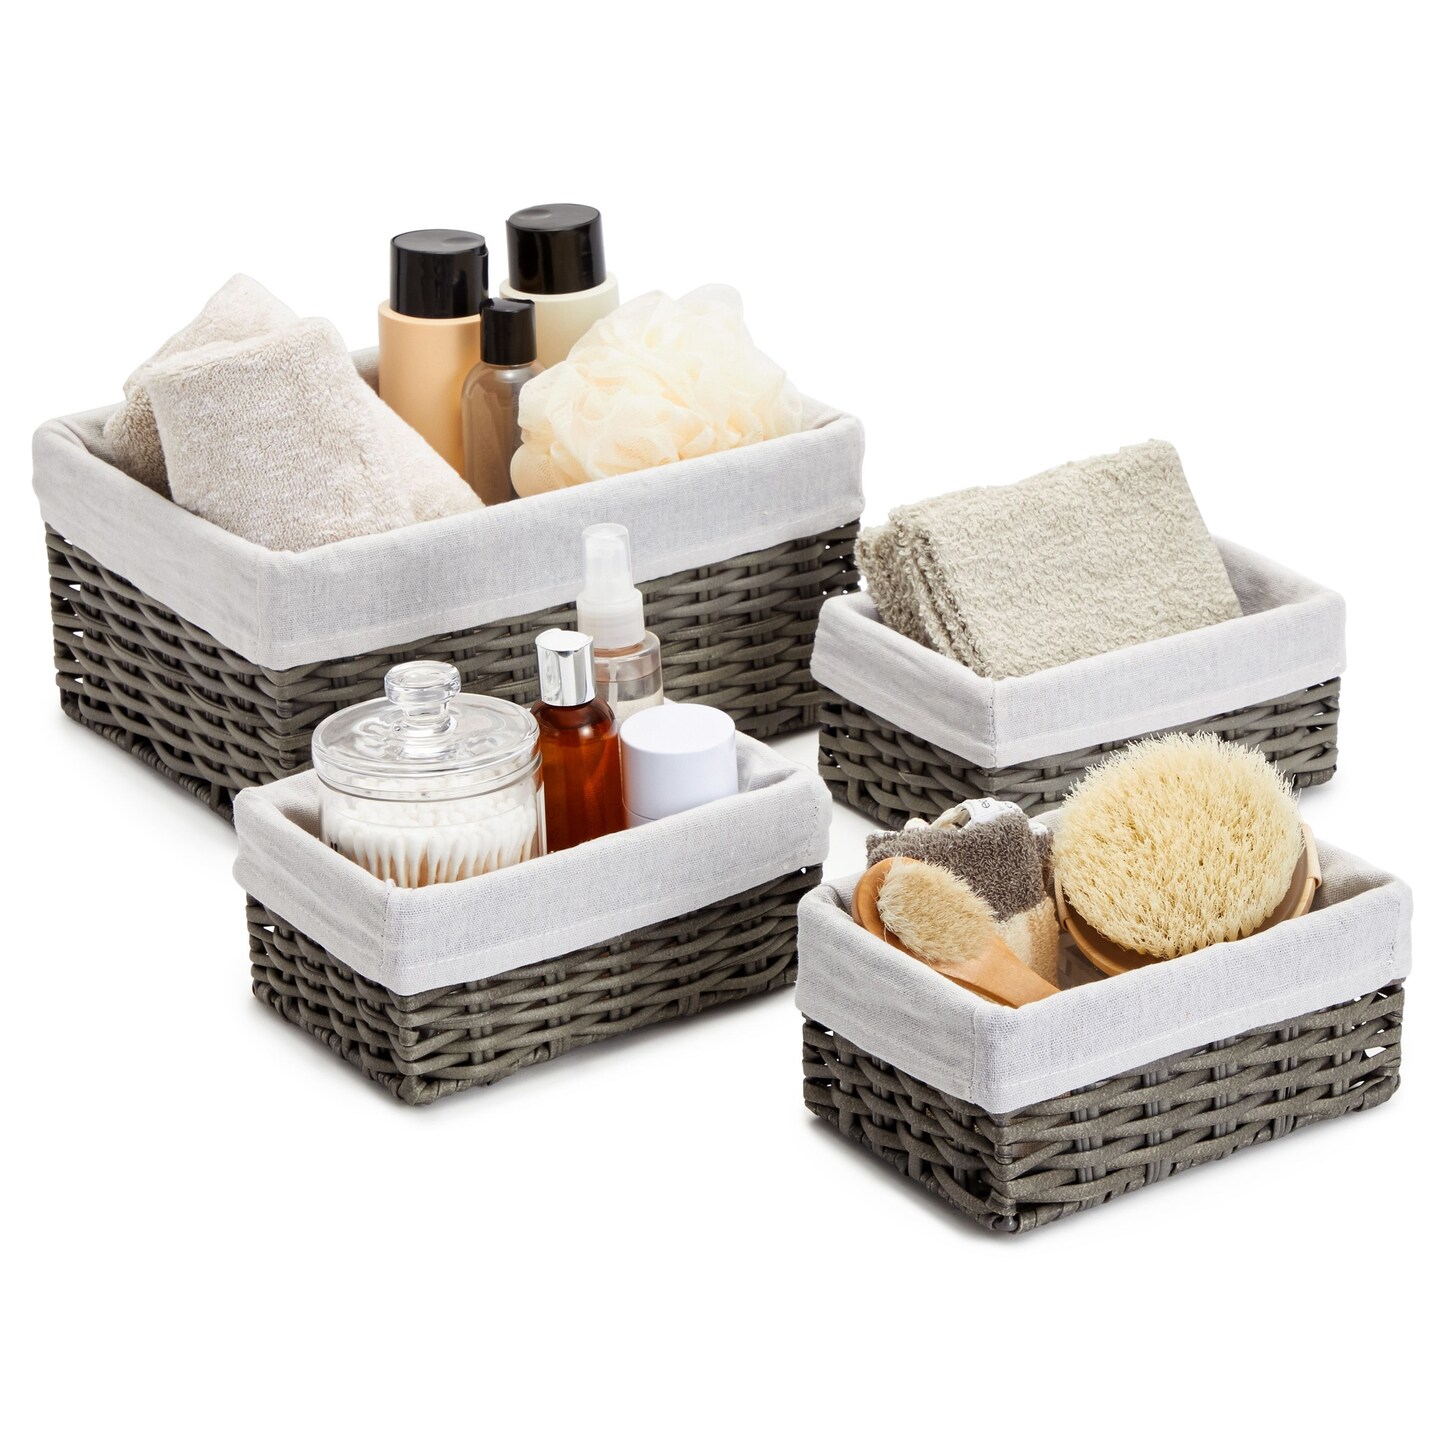 Our Favorite Decorative Baskets for Organizing Organizational Ideas